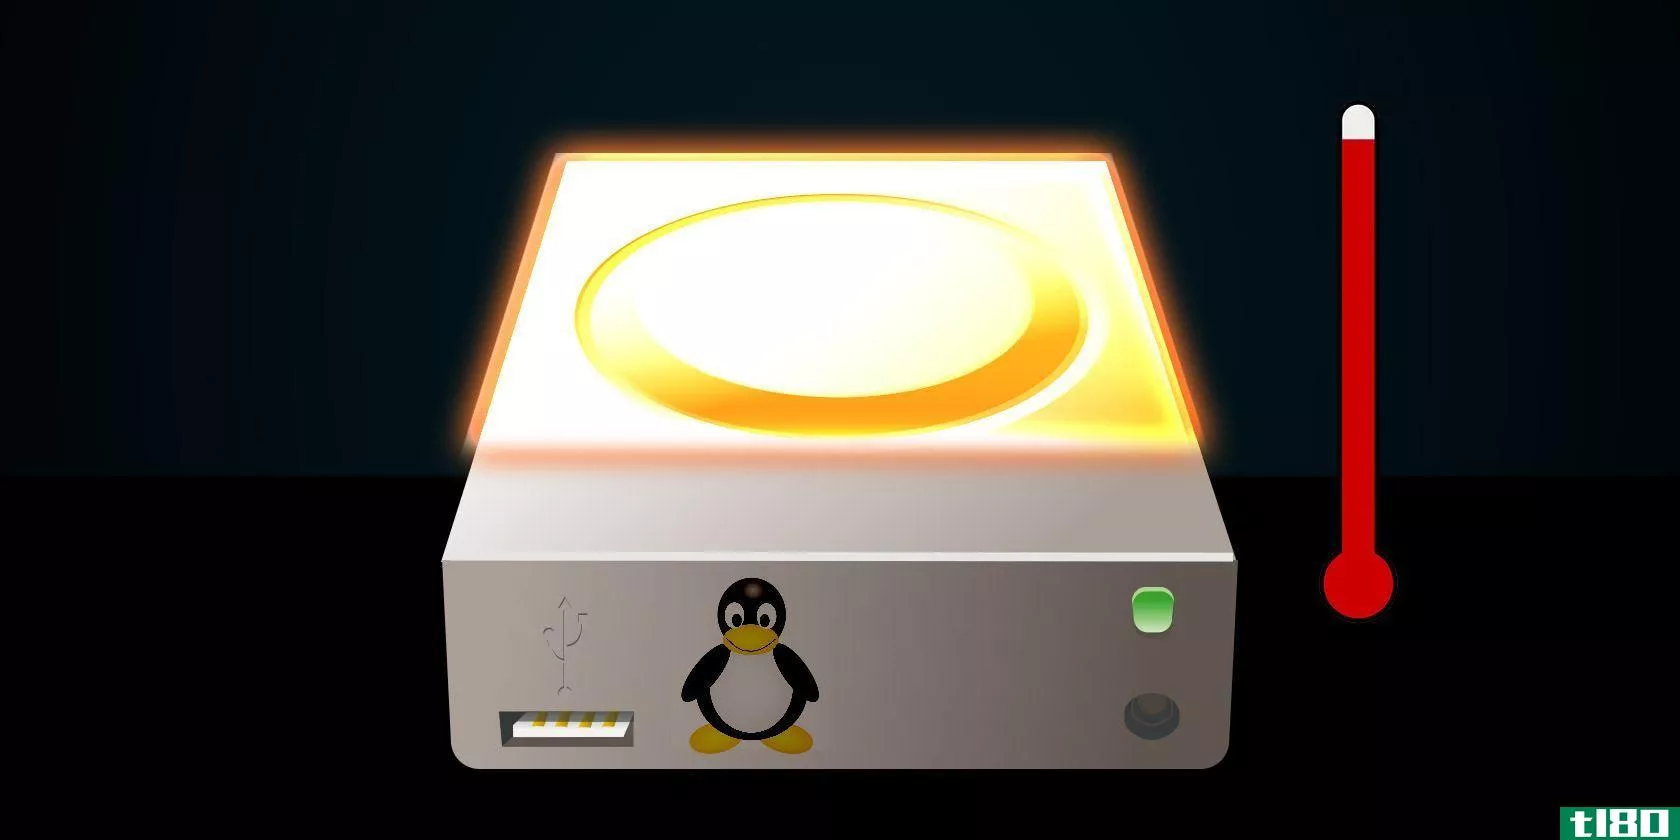 disk-usage-linux-featured